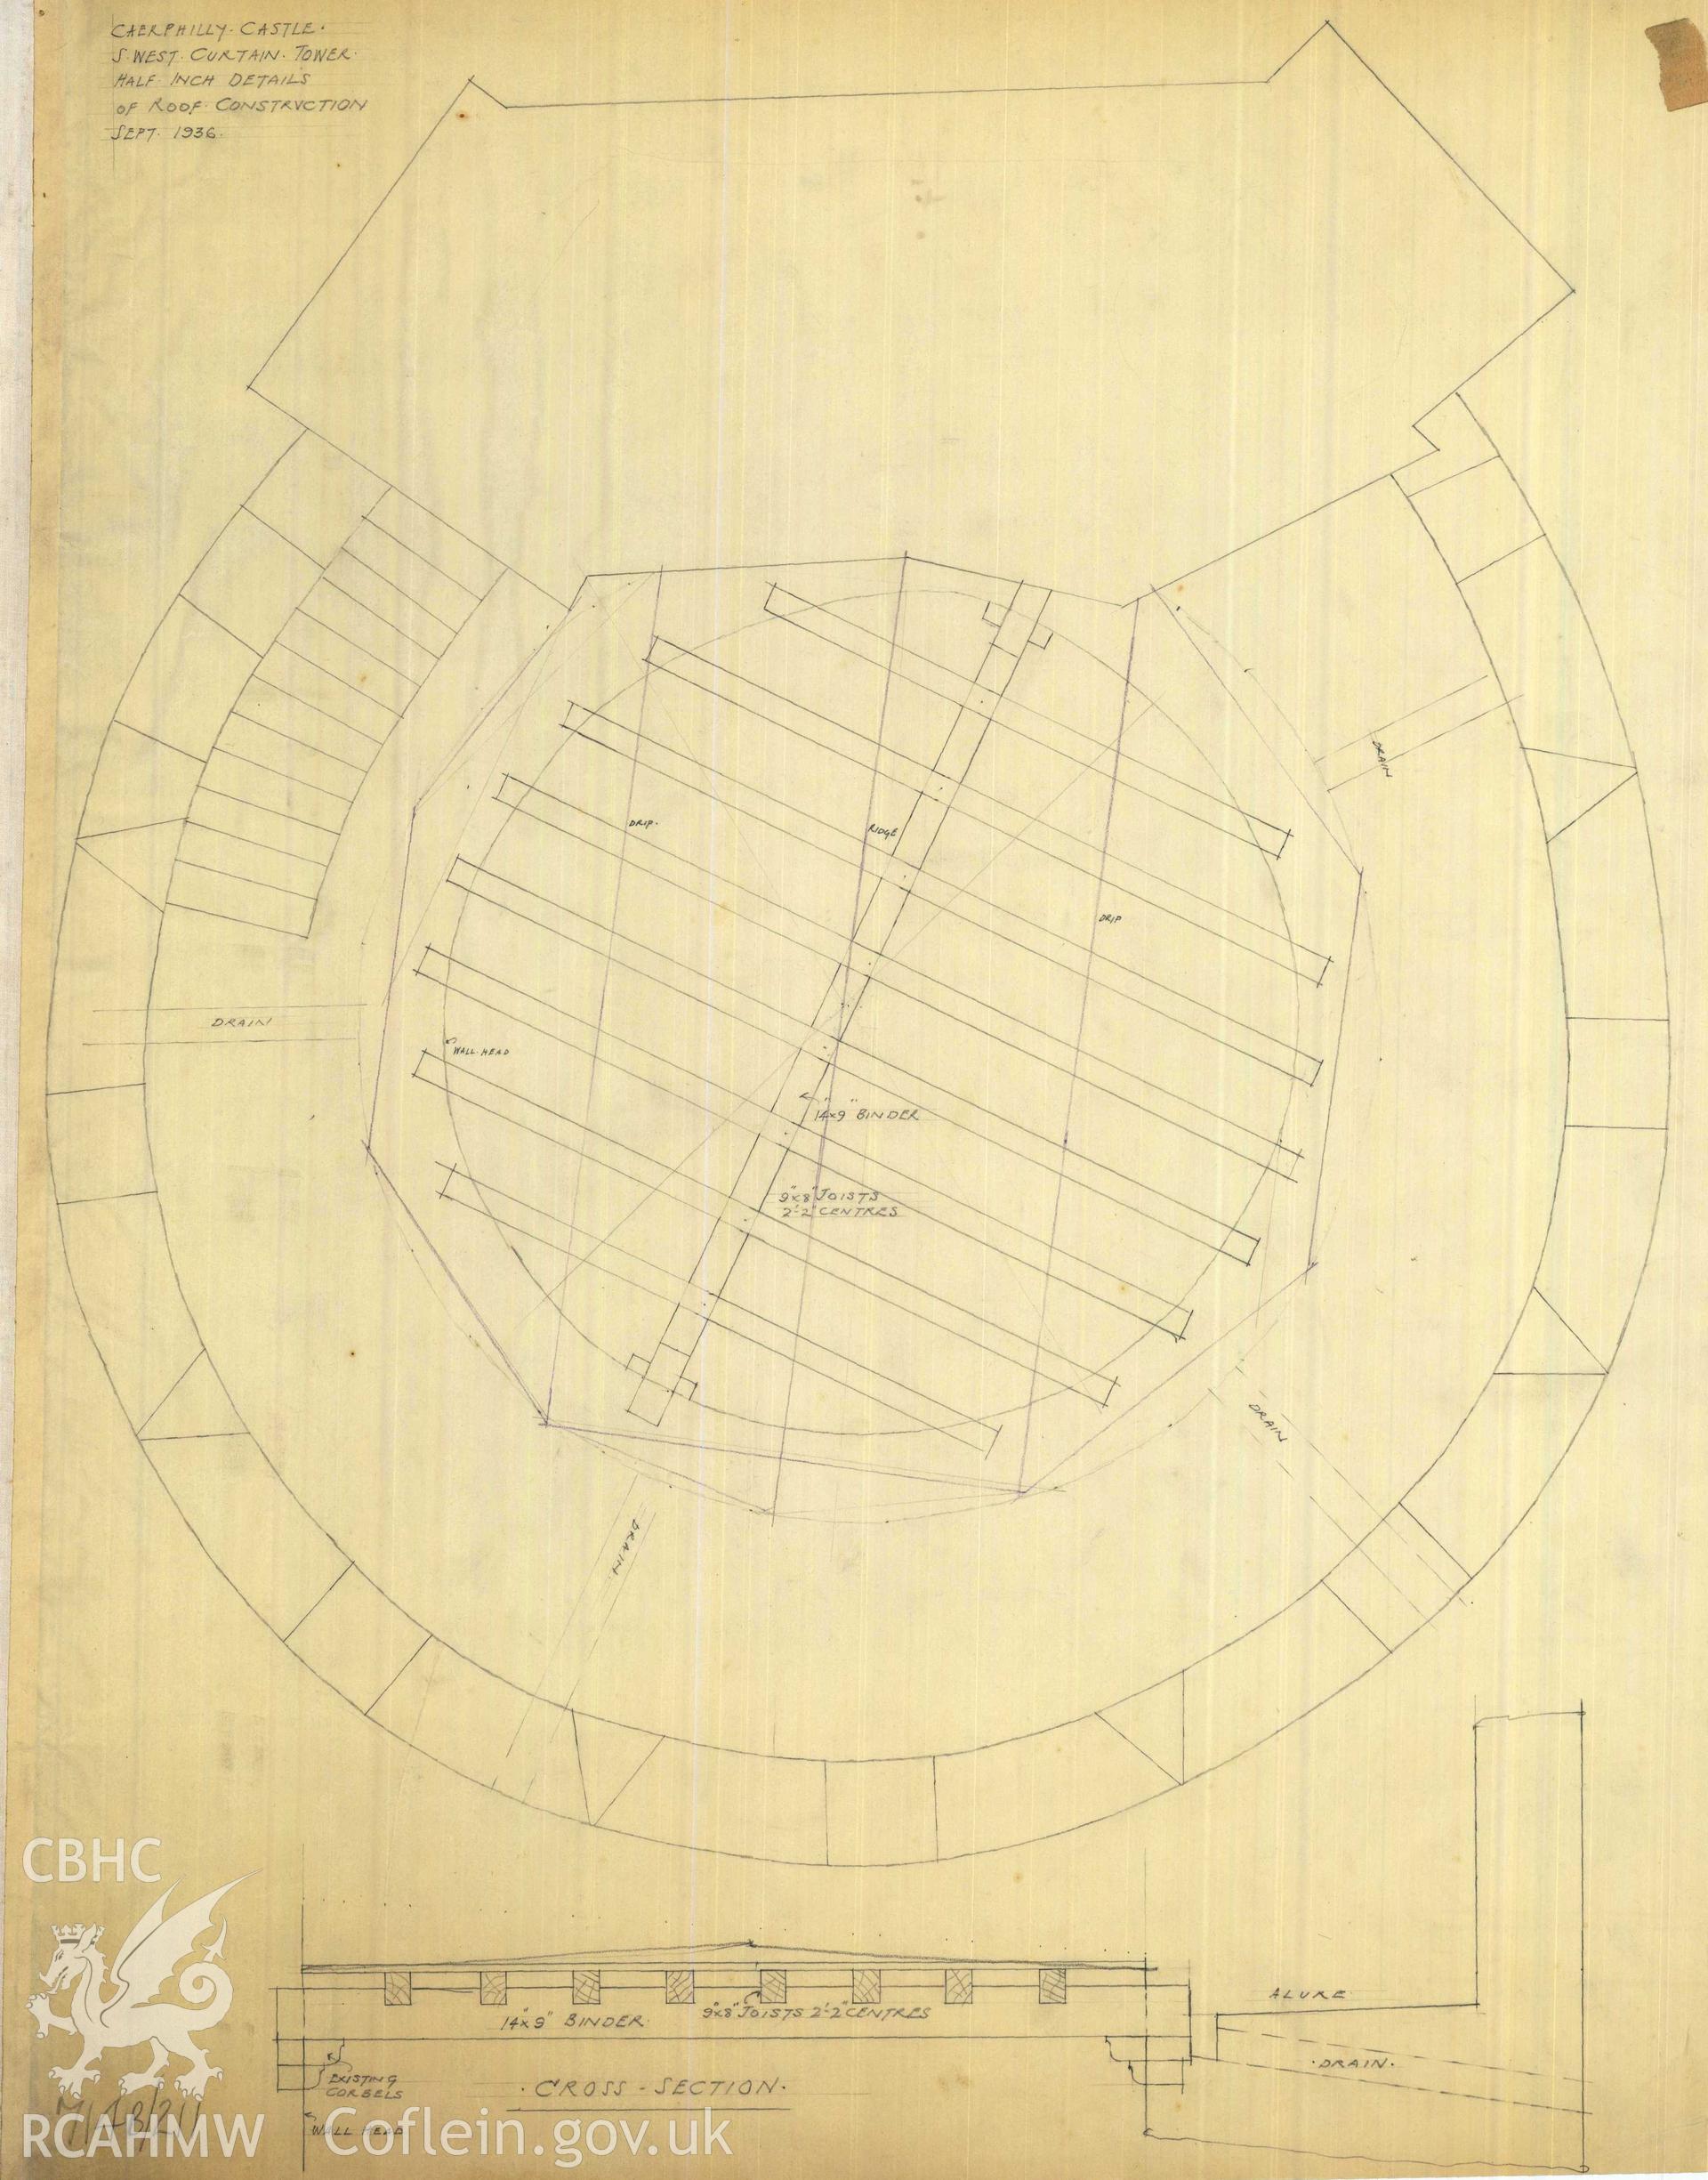 Cadw guardianship monument drawing of Caerphilly Castle. SW tower, roof joists. Cadw Ref. No:714B/211. Scale 1:24.